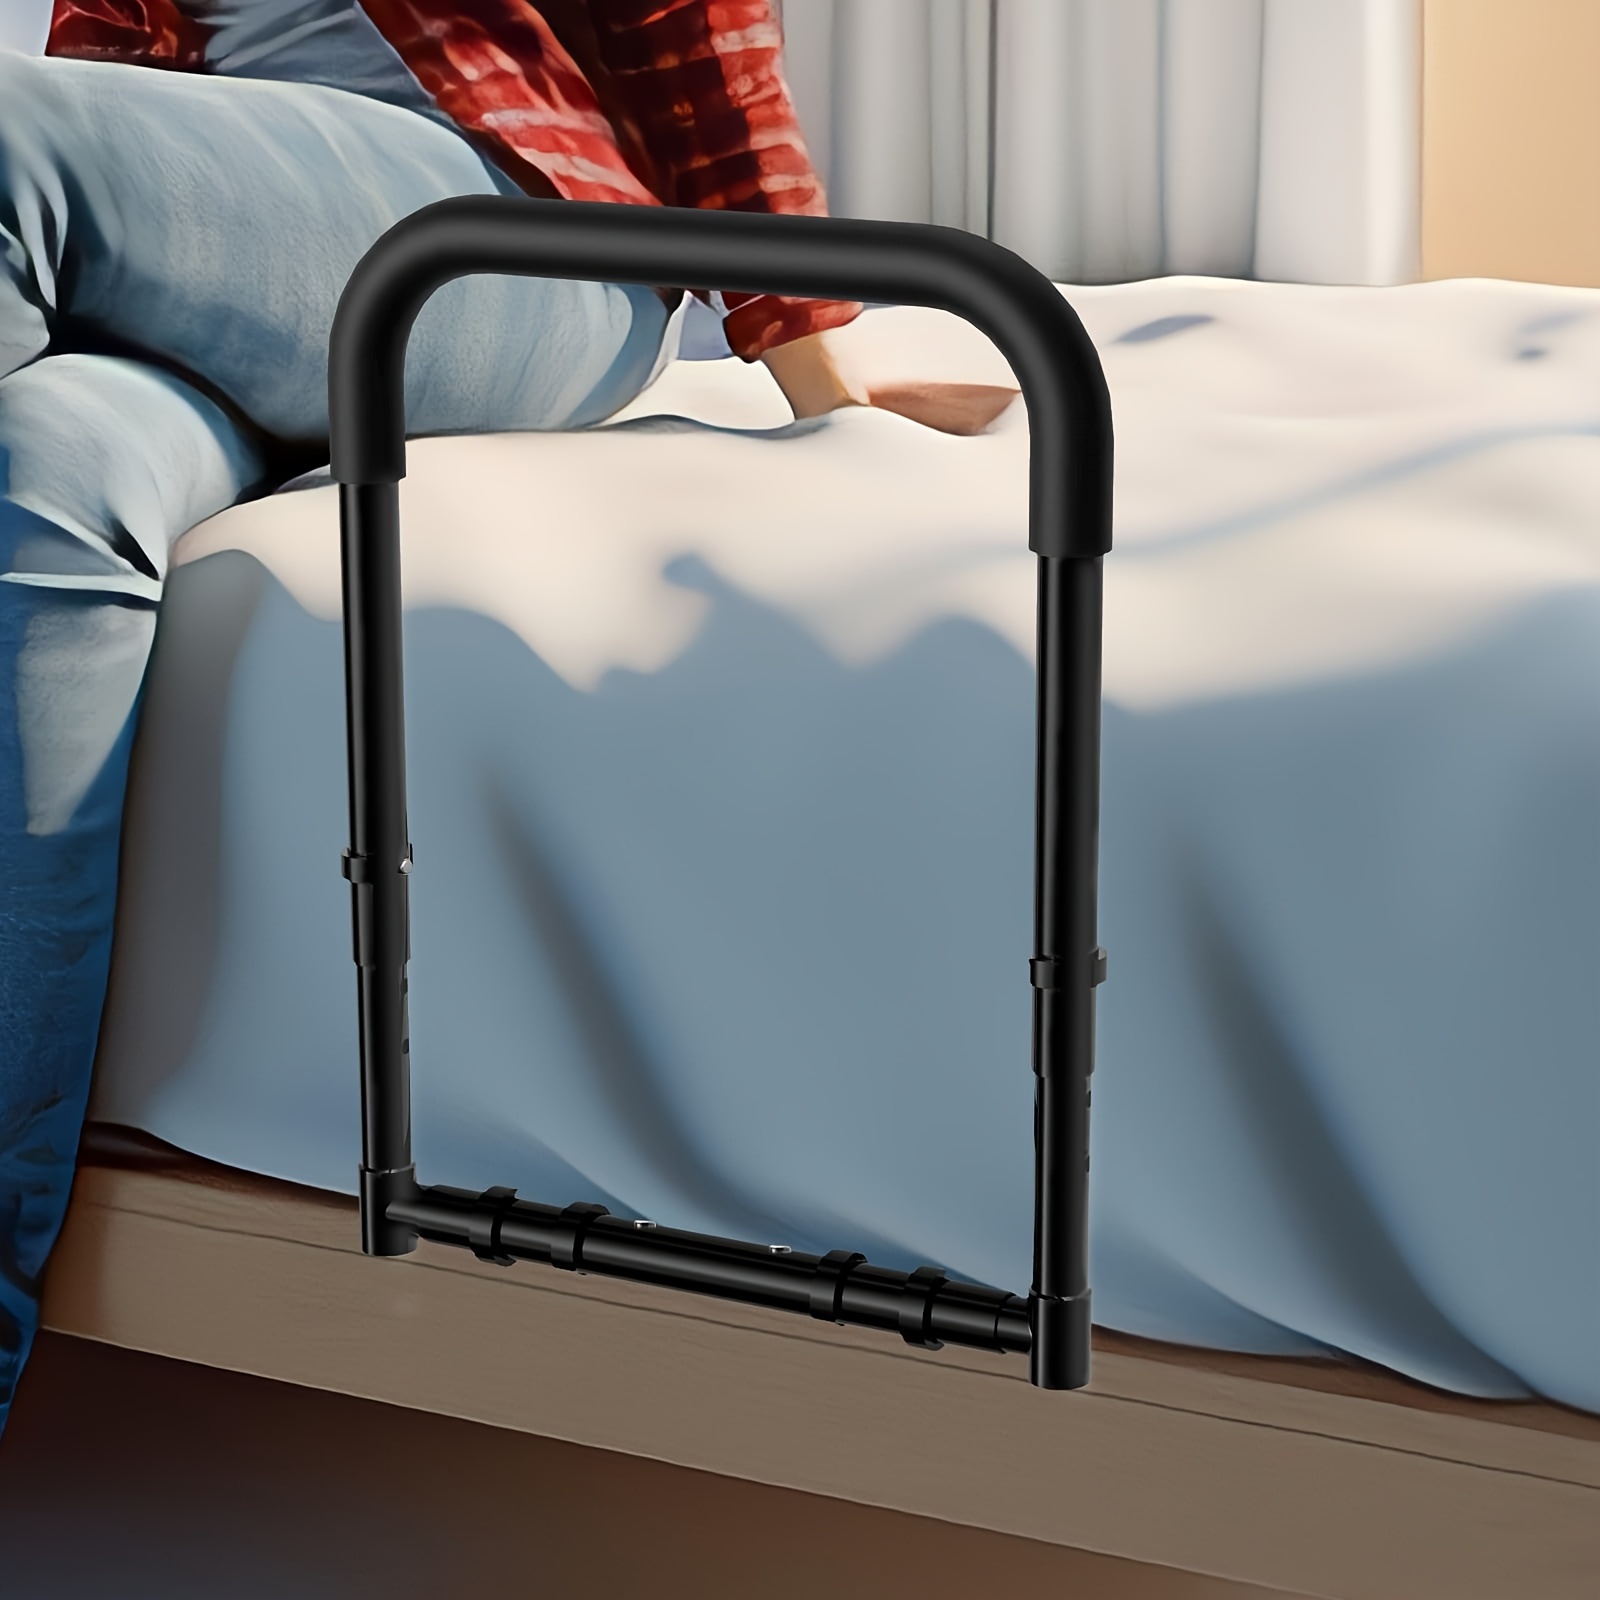 Carex Adult Bed Rails for Elderly Assistance - Bed Hand Rails - Bed Safety  Rails for Seniors - Adjustable to Fit Twin, Full, Queen and King Size Beds  